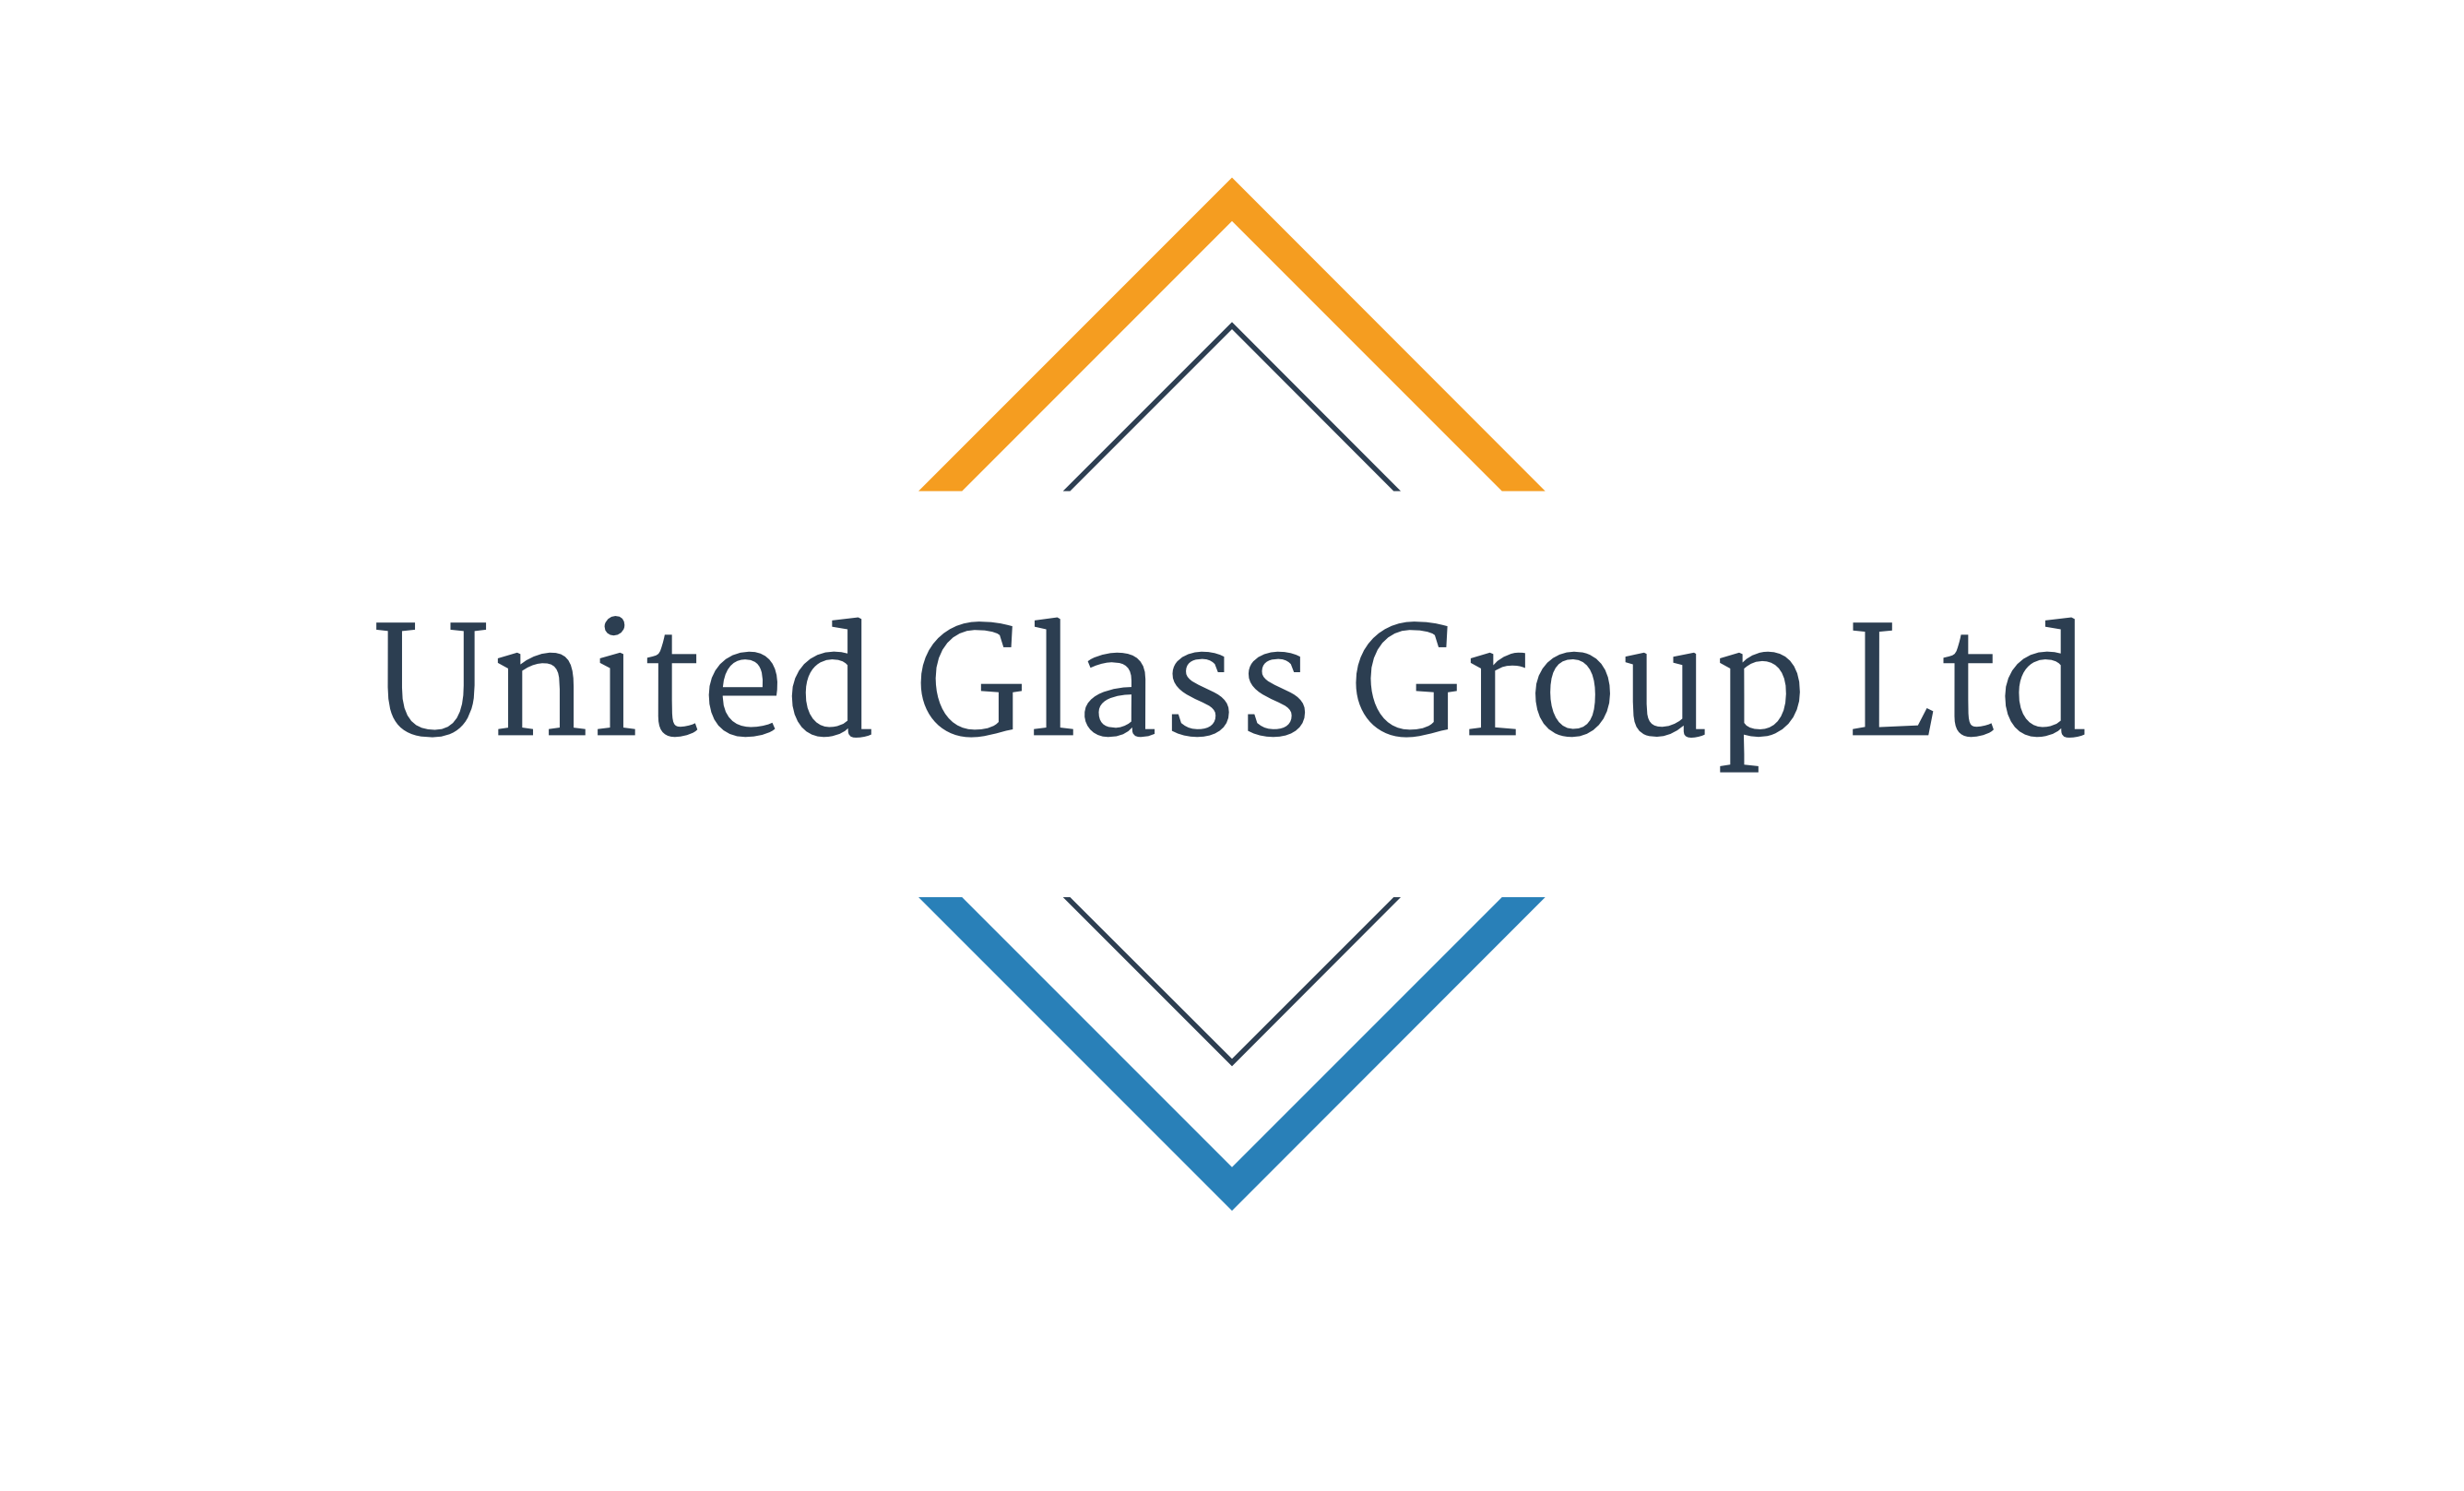 PROGRESSIVE AND SERVICE ORIENTATED GROUP OF ARCHITECTURAL GLASS PROCESSING COMPANIES